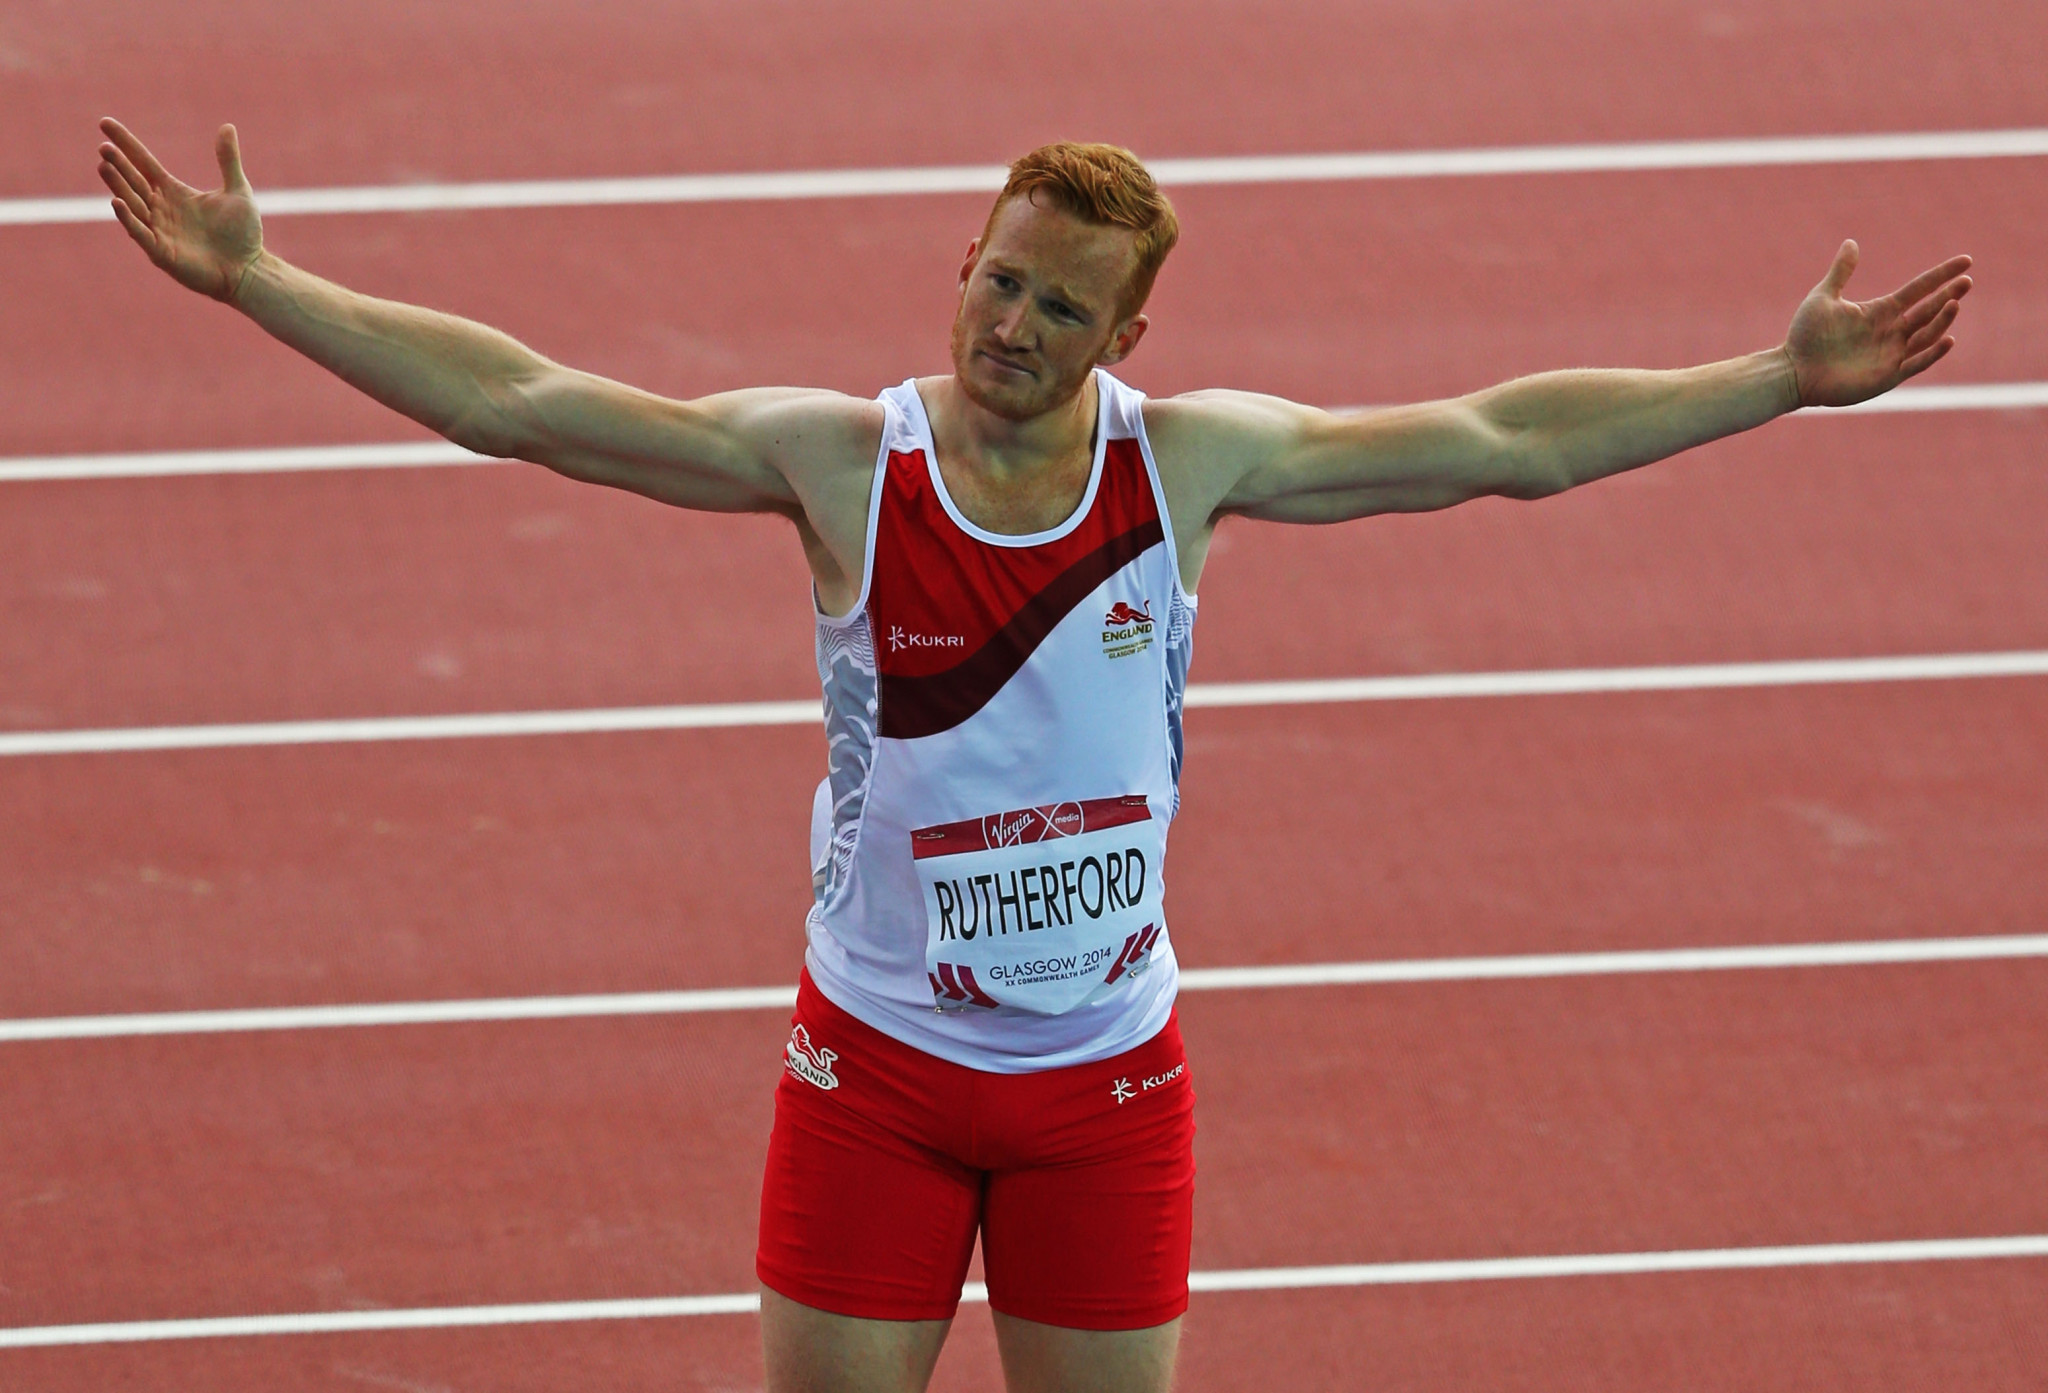 Defending champion Greg Rutherford leads the England athletics team for Gold Coast 2018 ©Getty Images